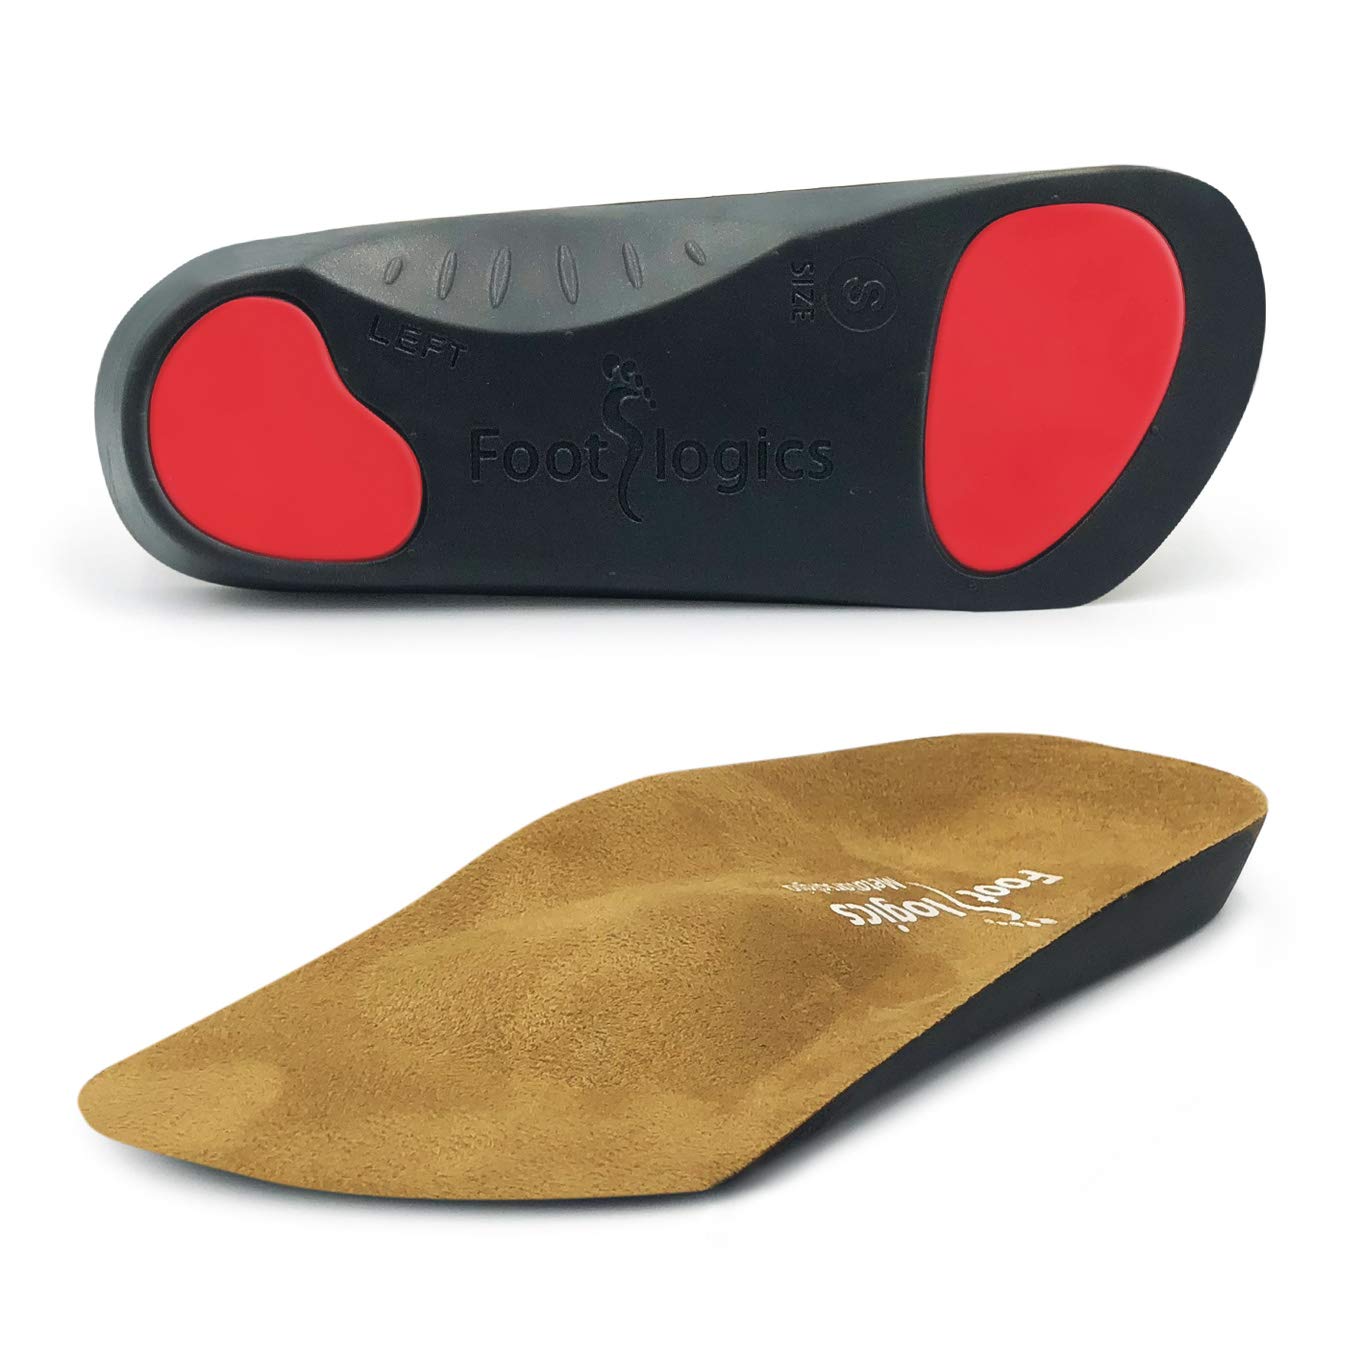 Foot logics Footlogics 3/4 Length Orthotic Shoe Insoles with Built-in Raise for Ball of Foot Pain, Morton’s Neuroma, Flat Feet - Metatarsalg